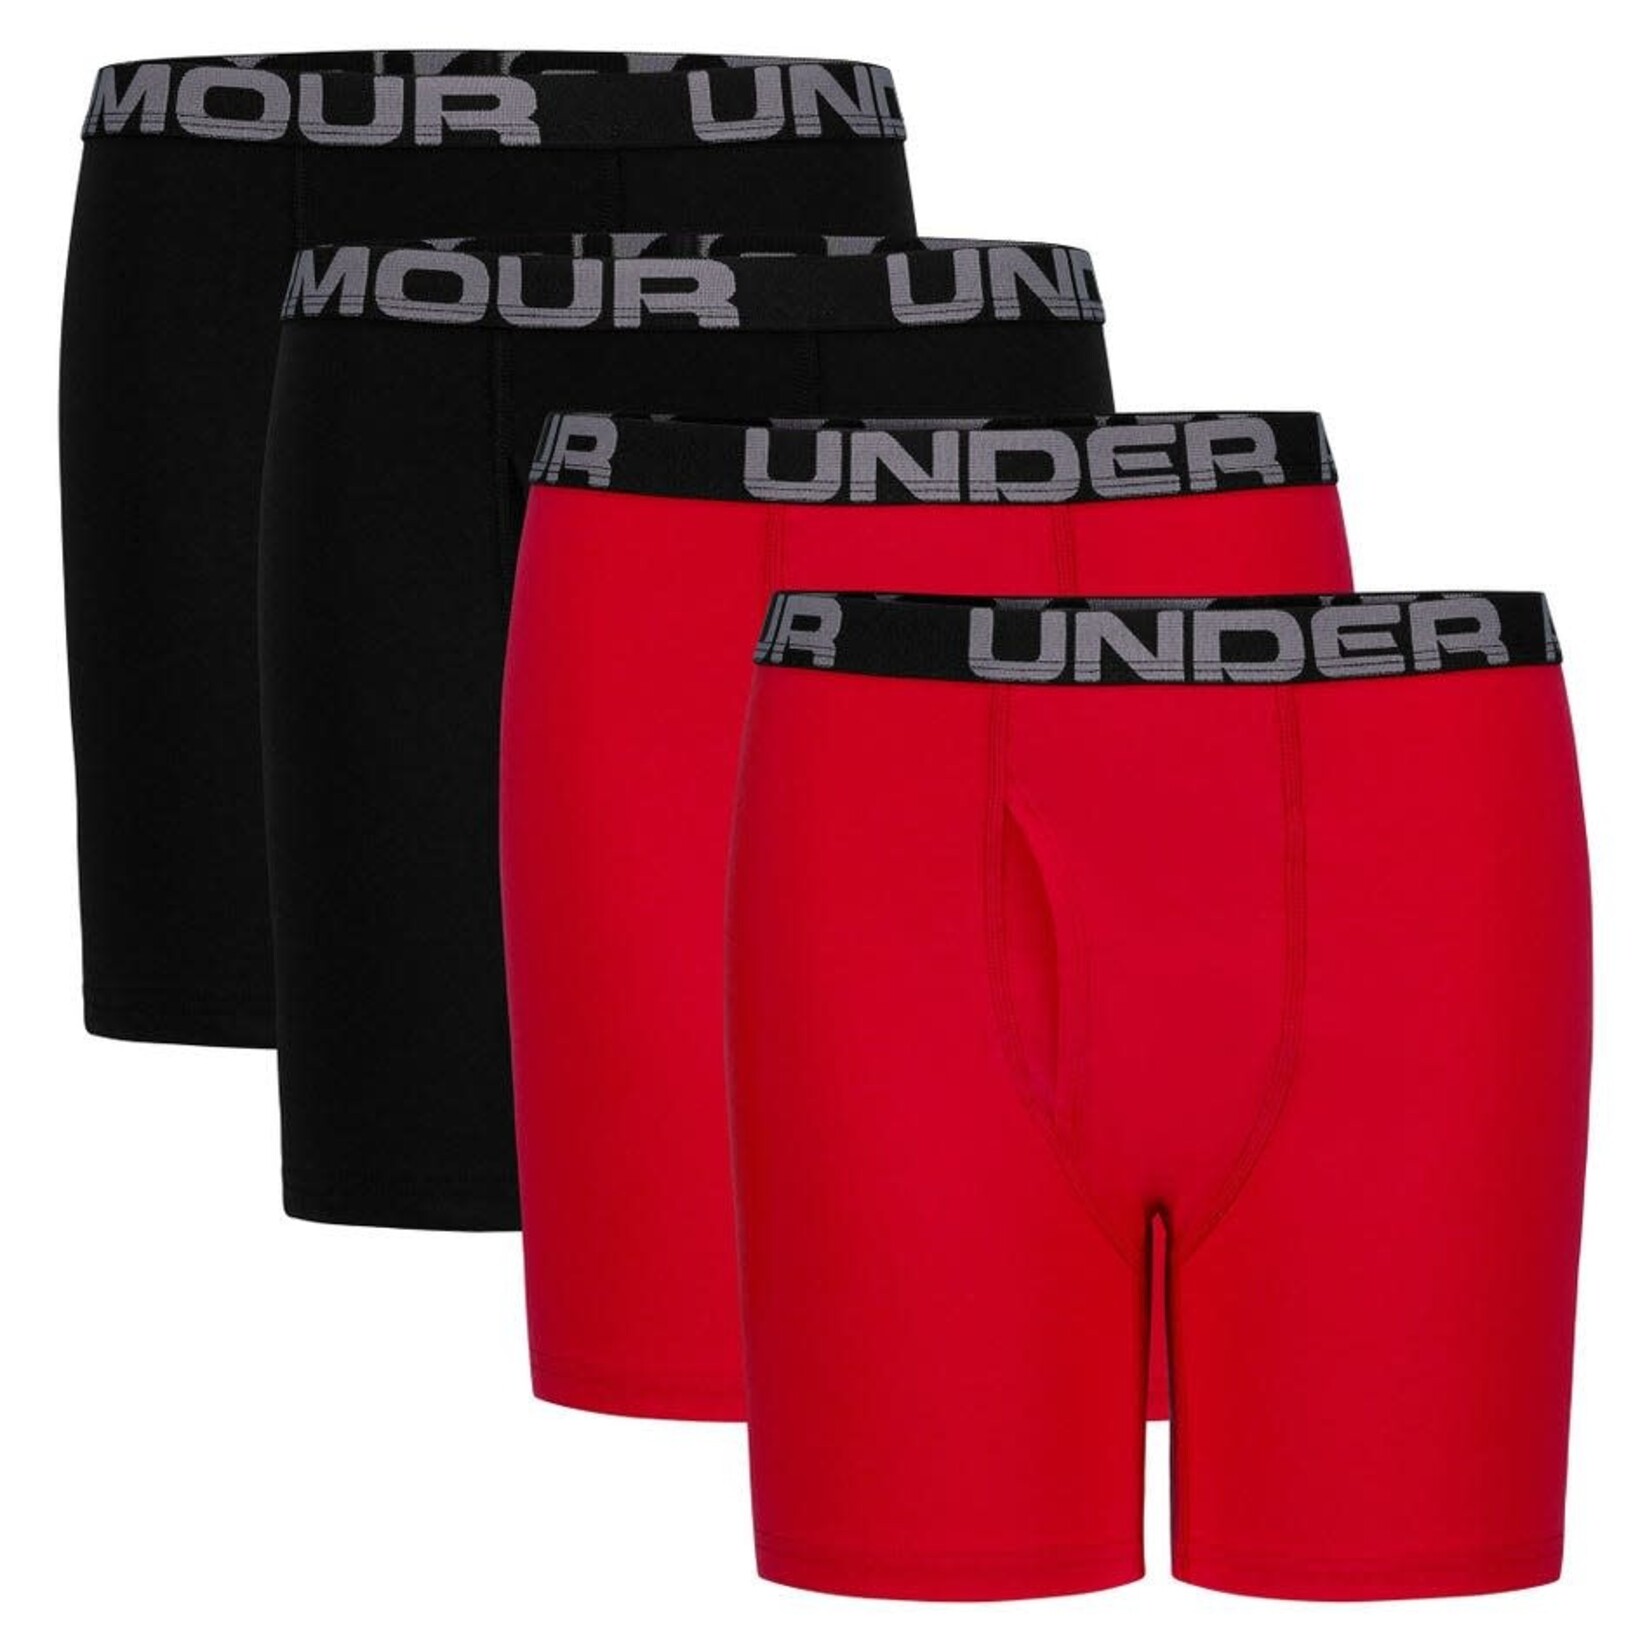 Under Armour Underwear, Cotton Boxer Brief Set, 4-Pack, Boys - Time-Out  Sports Excellence